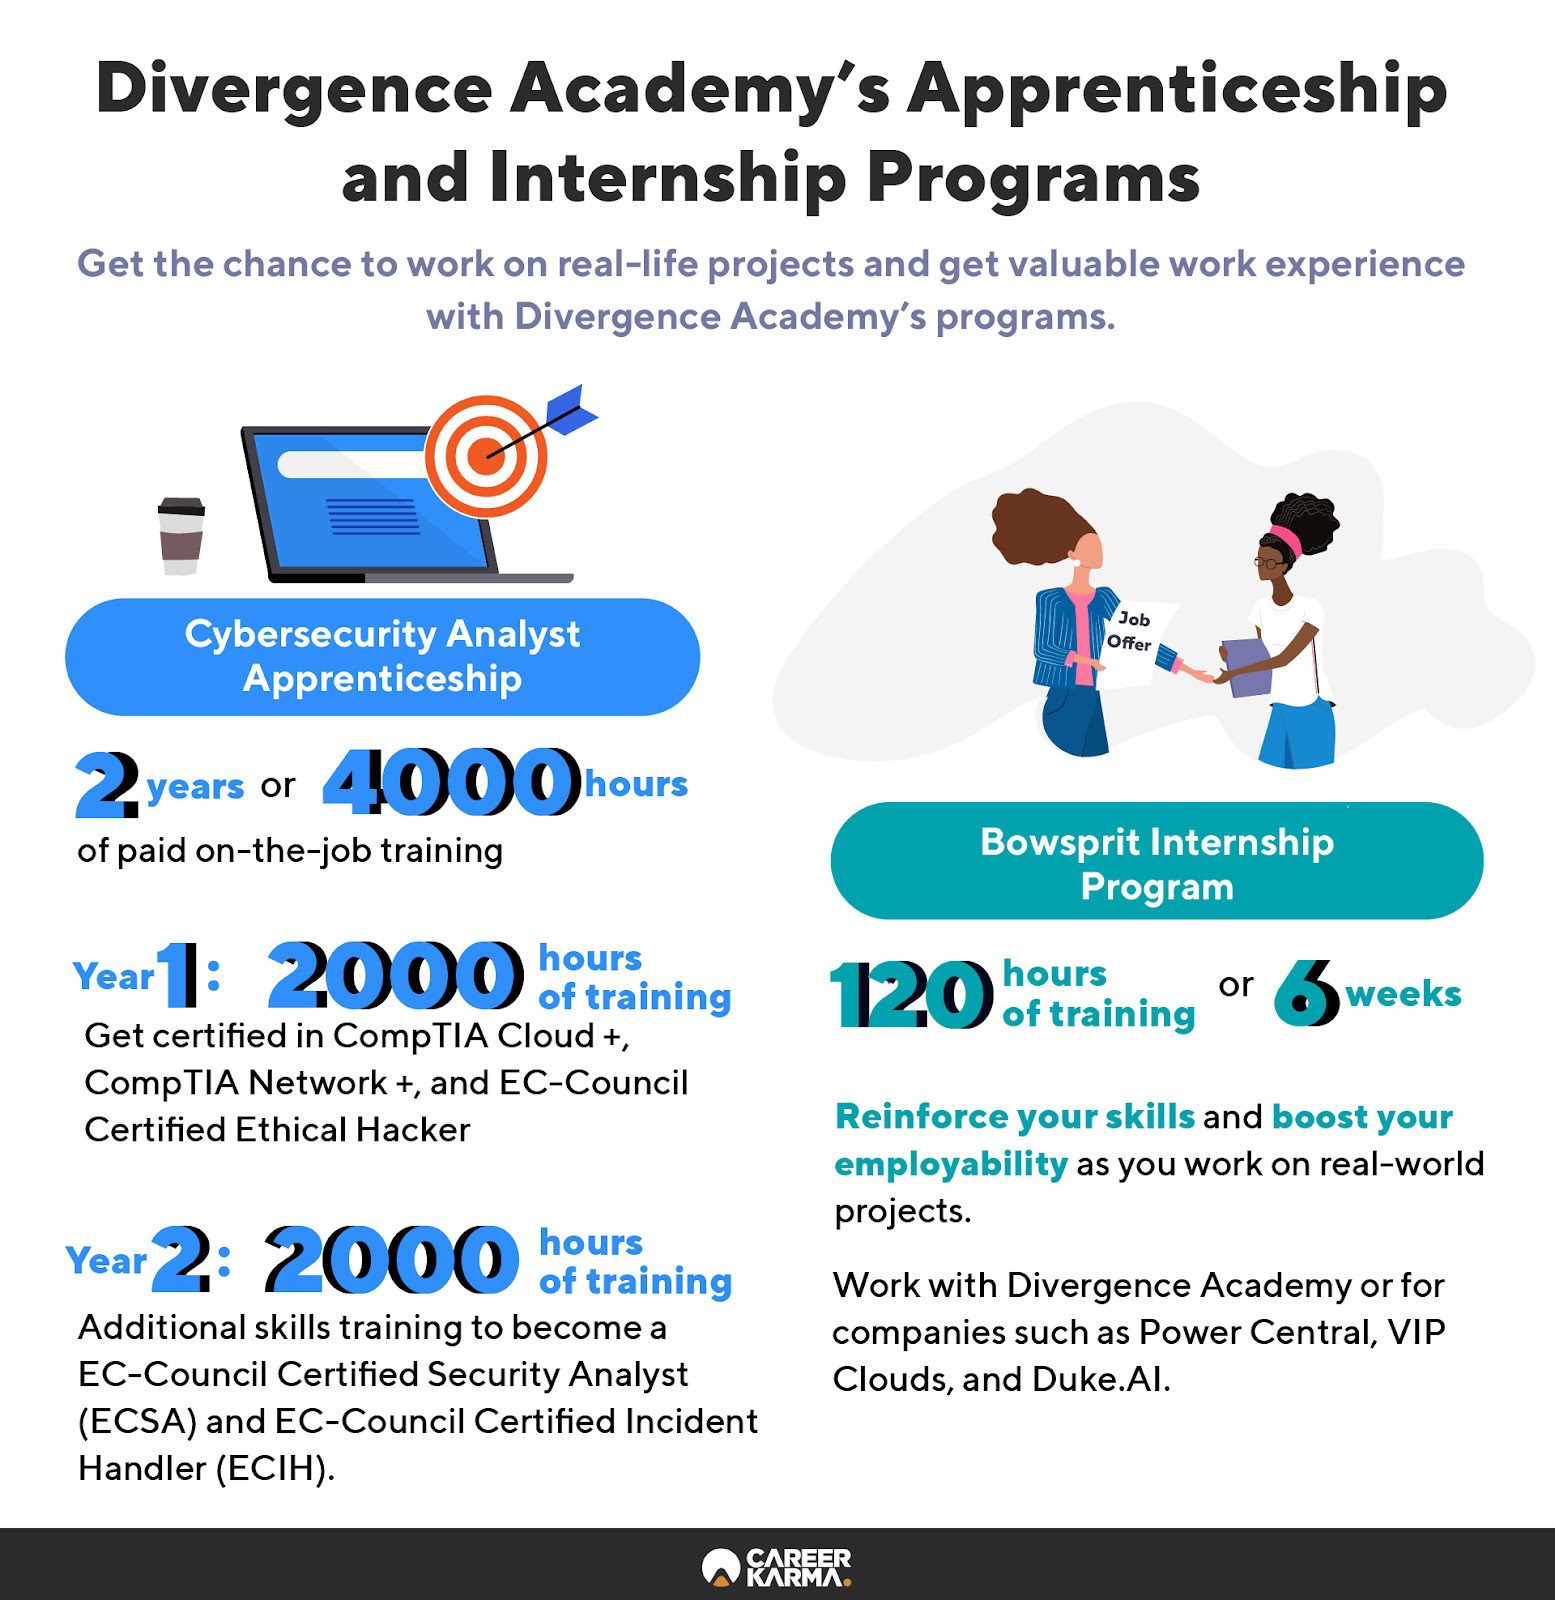 An infographic featuring Divergence Academy’s apprenticeship and internship programs